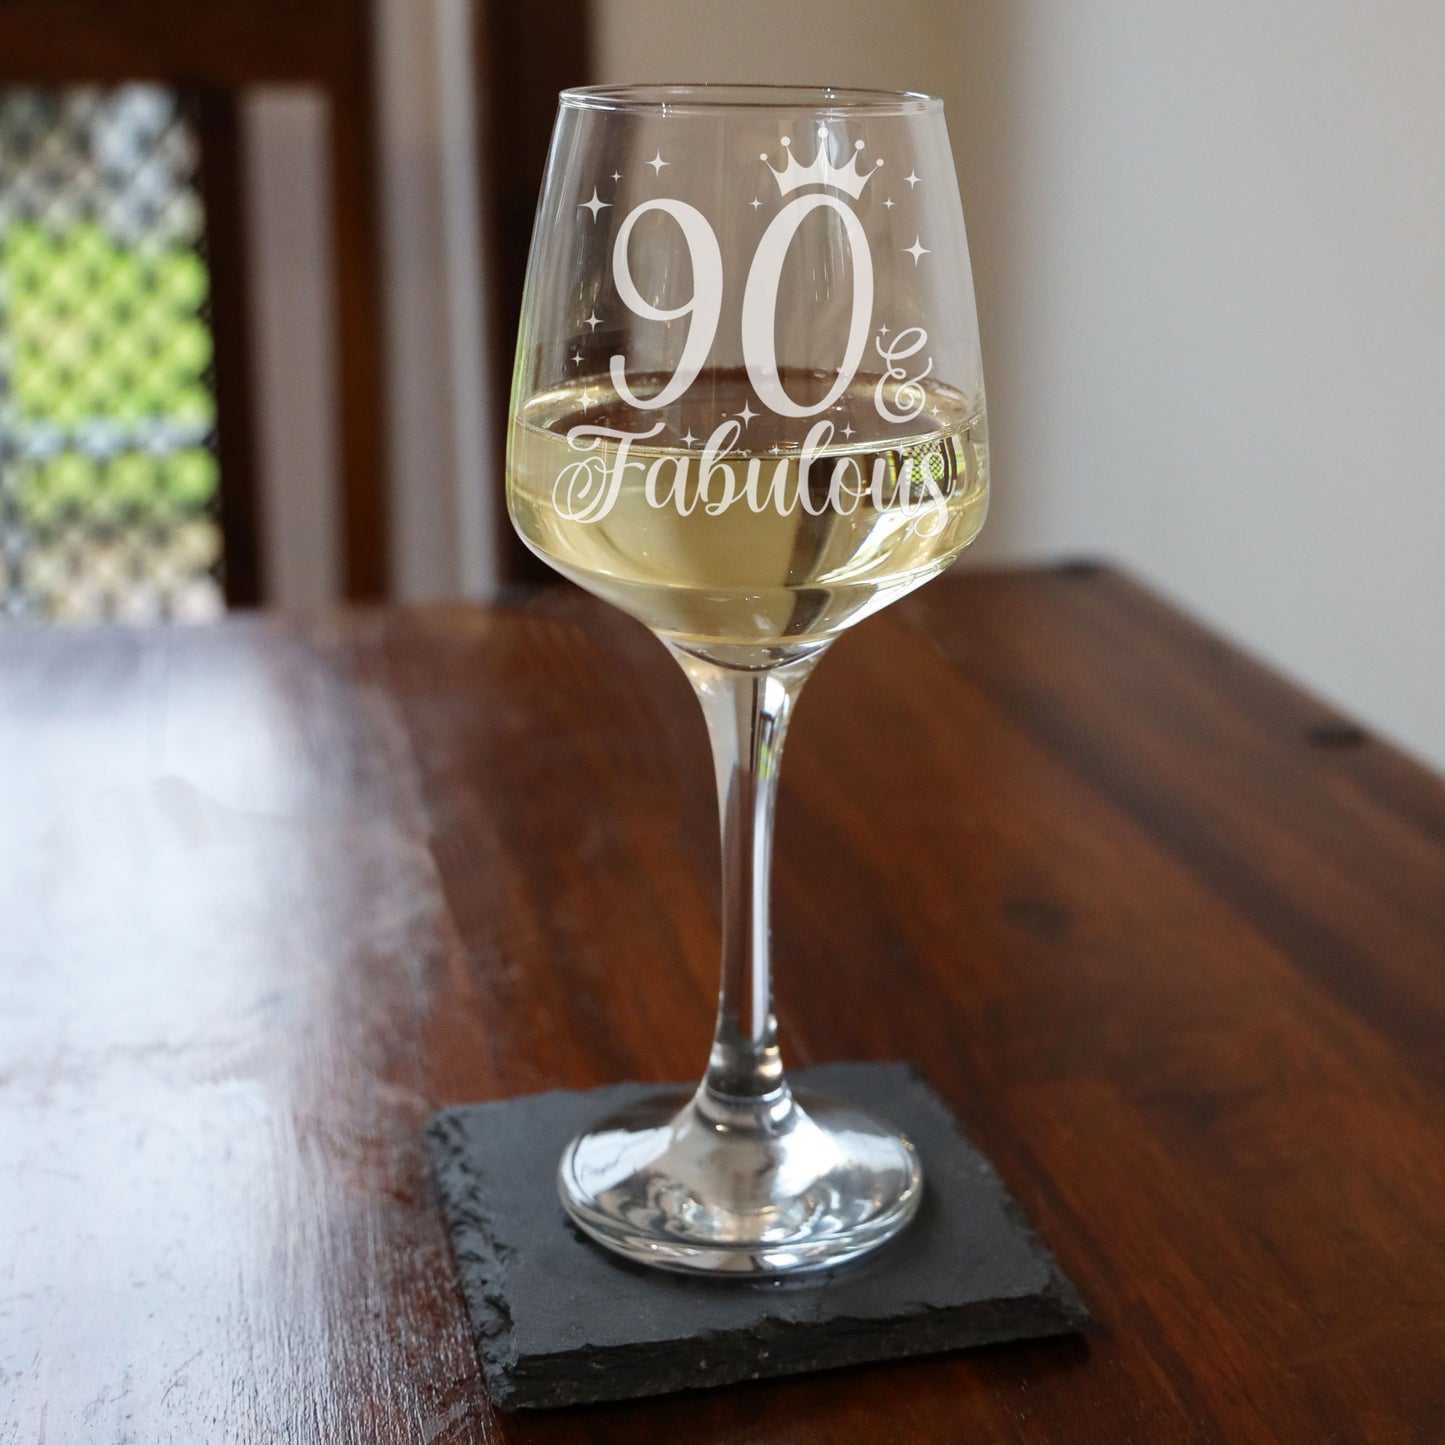 90 & Fabulous 90th Birthday Gift Engraved Wine Glass and/or Coaster Set  - Always Looking Good - Wine Glass Only  